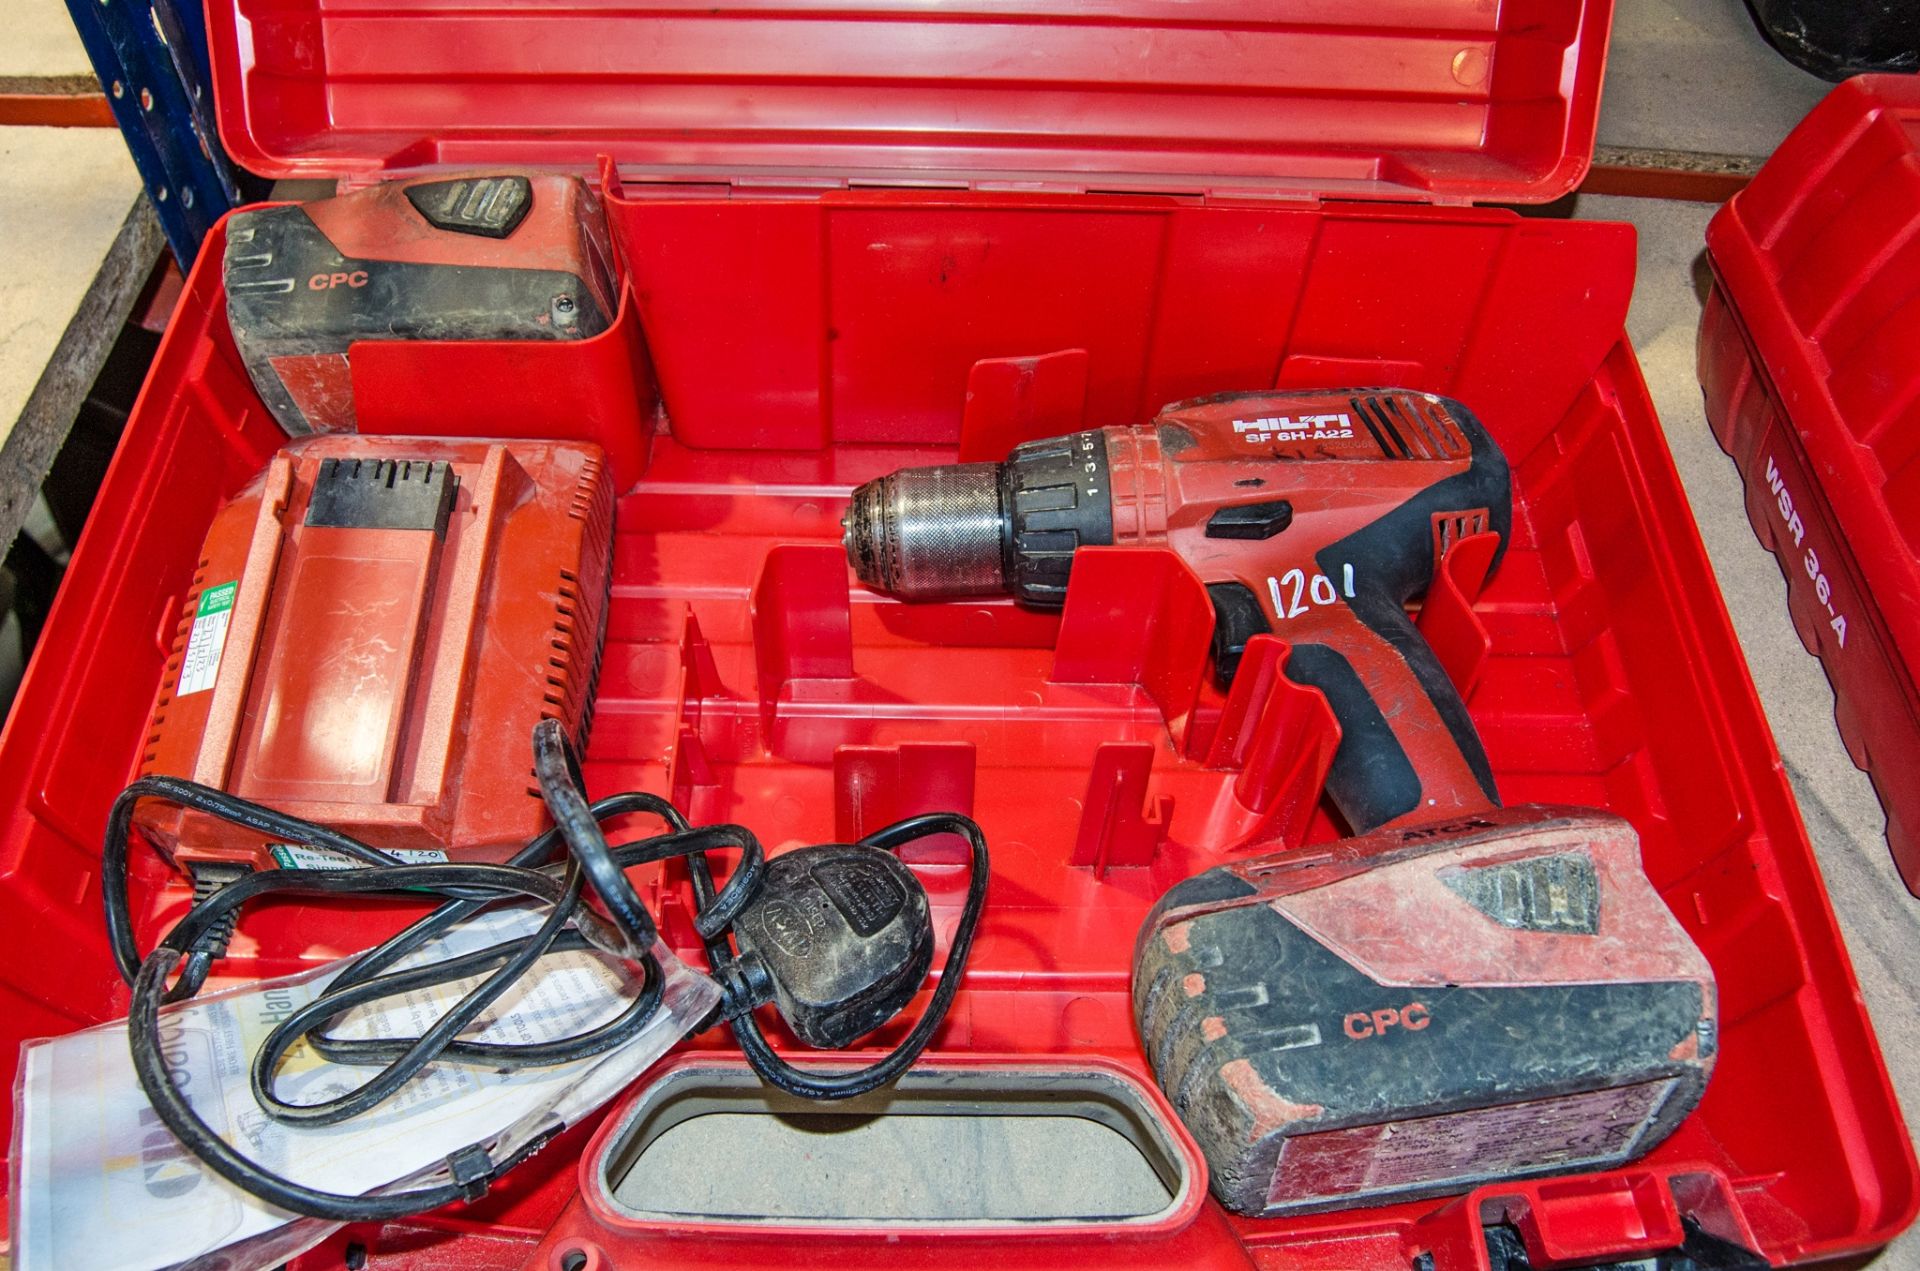 Hilti SF 6H-A22 22v cordless drill c/w 2 batteries, charger and carry case EXP3116